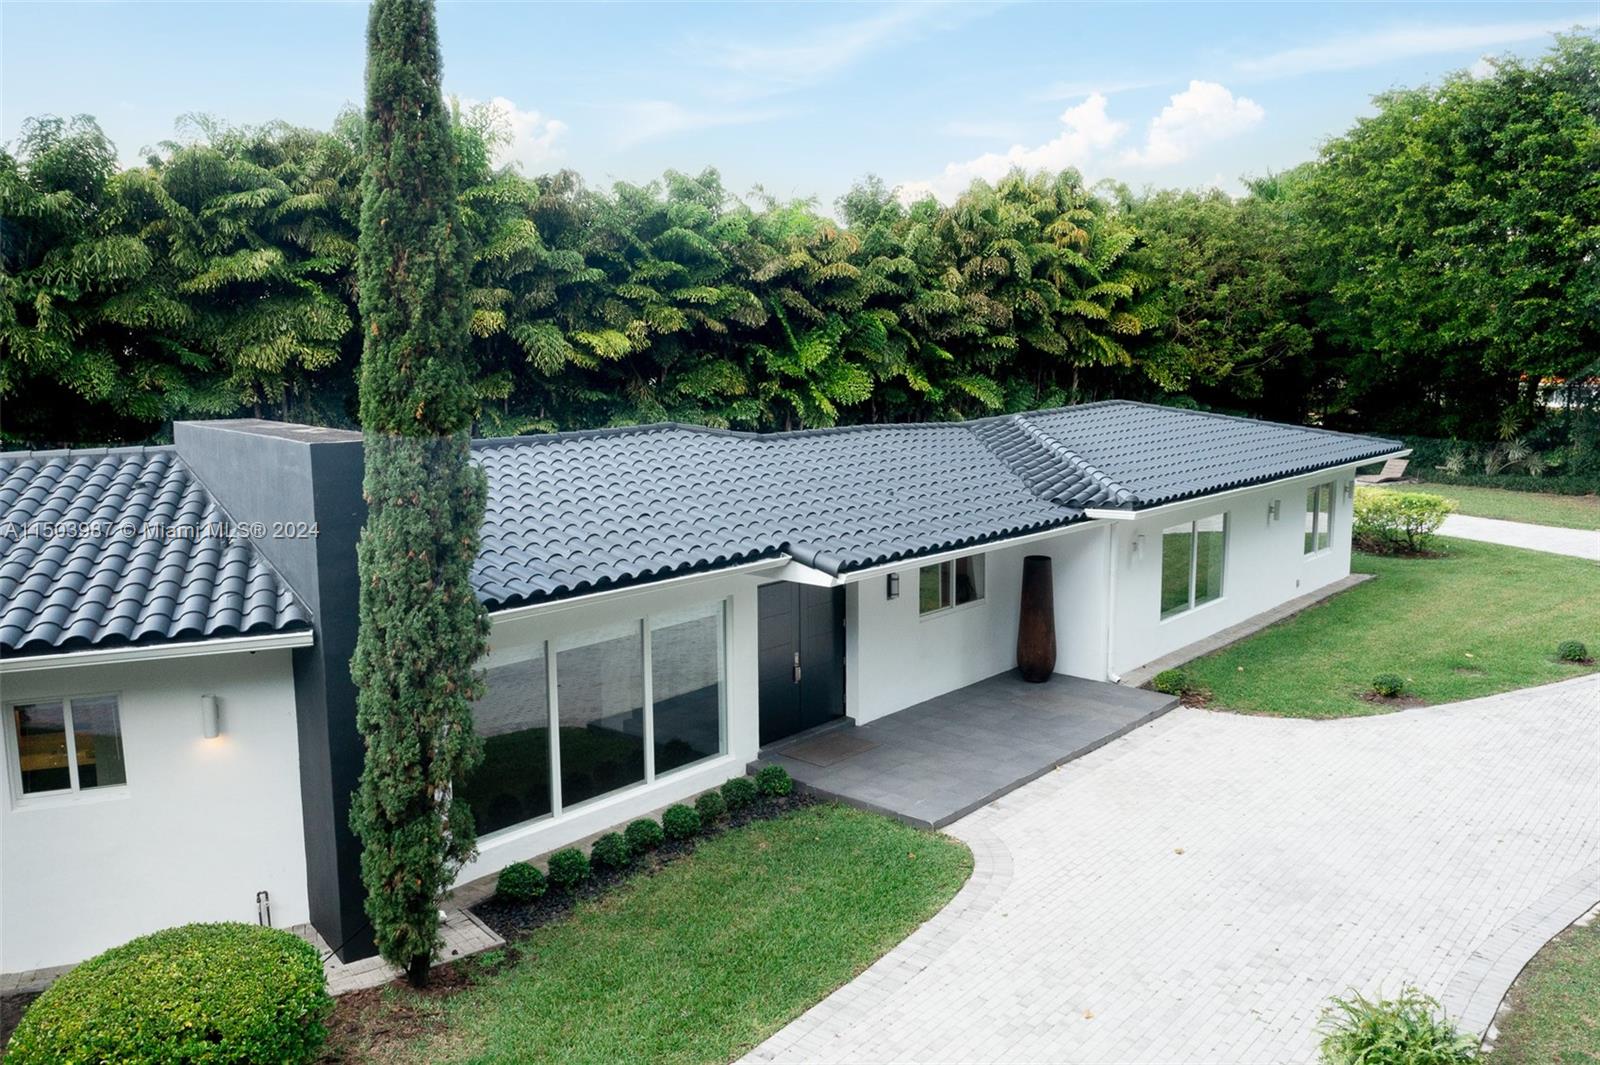 Meticulously remodeled 4,481 SF residence located in the heart of Coral Gables. This walled one-acre corner lot has 4 bedrooms, 3.5-bathrooms, and the serenity of oak and banyan trees. The exceptional split floor plan showcases thoughtfully located and spacious bedrooms, two primary suites, and 3.5 bathrooms. A gourmet eat-in kitchen offers ample counter space and an oversized walk-in pantry. The beautiful backyard features a pool, covered dining and BBQ space, and lush landscaping providing optimal privacy. Additional features include impact windows and doors and stunning porcelain floors throughout. Close to the best schools, restaurants, parks, and shopping. Also available for rent.